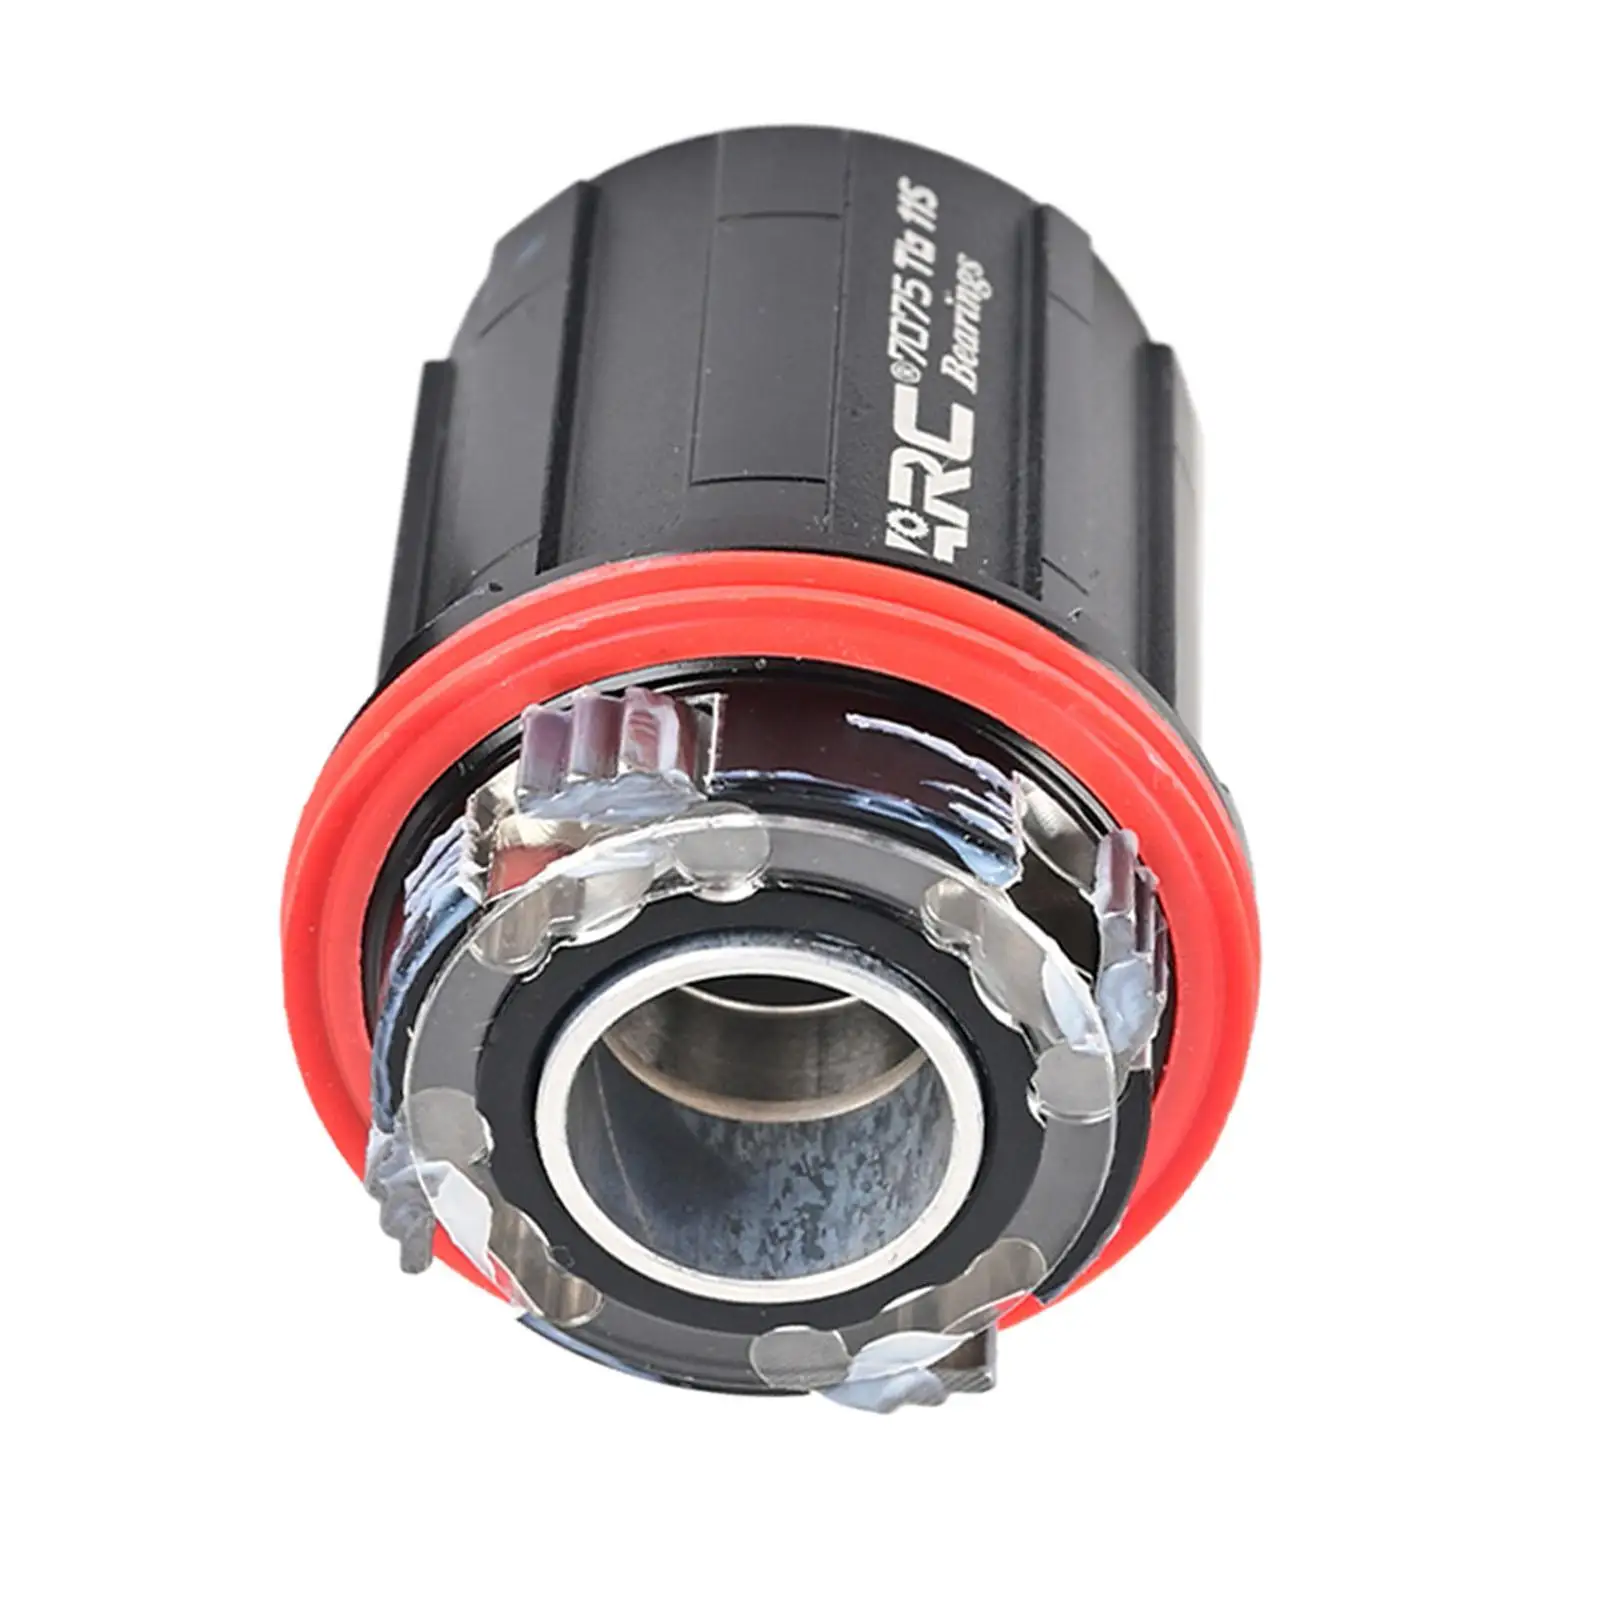 Standard XD/XDR  Classical Mountain   Seal Bearing 8-12 Speeds Adapter 6 Pawls Hub Parts Adaptor